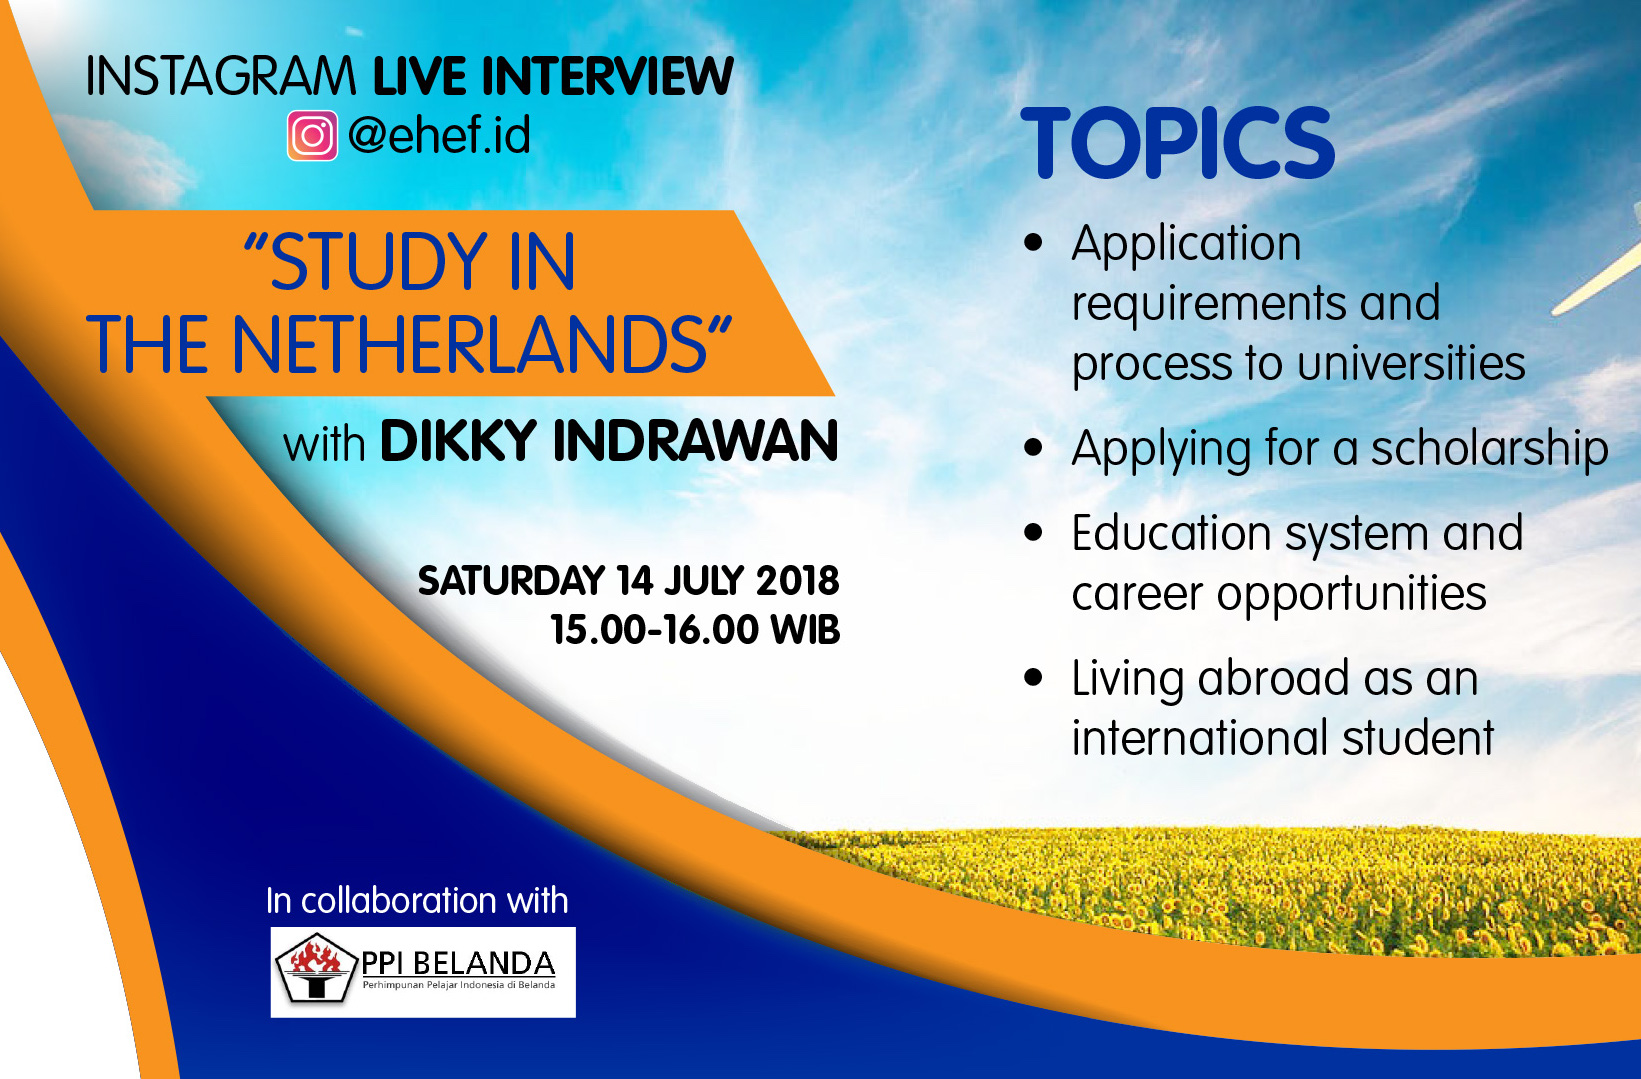 IG LIVE INTERVIEW “Study in The Netherlands”